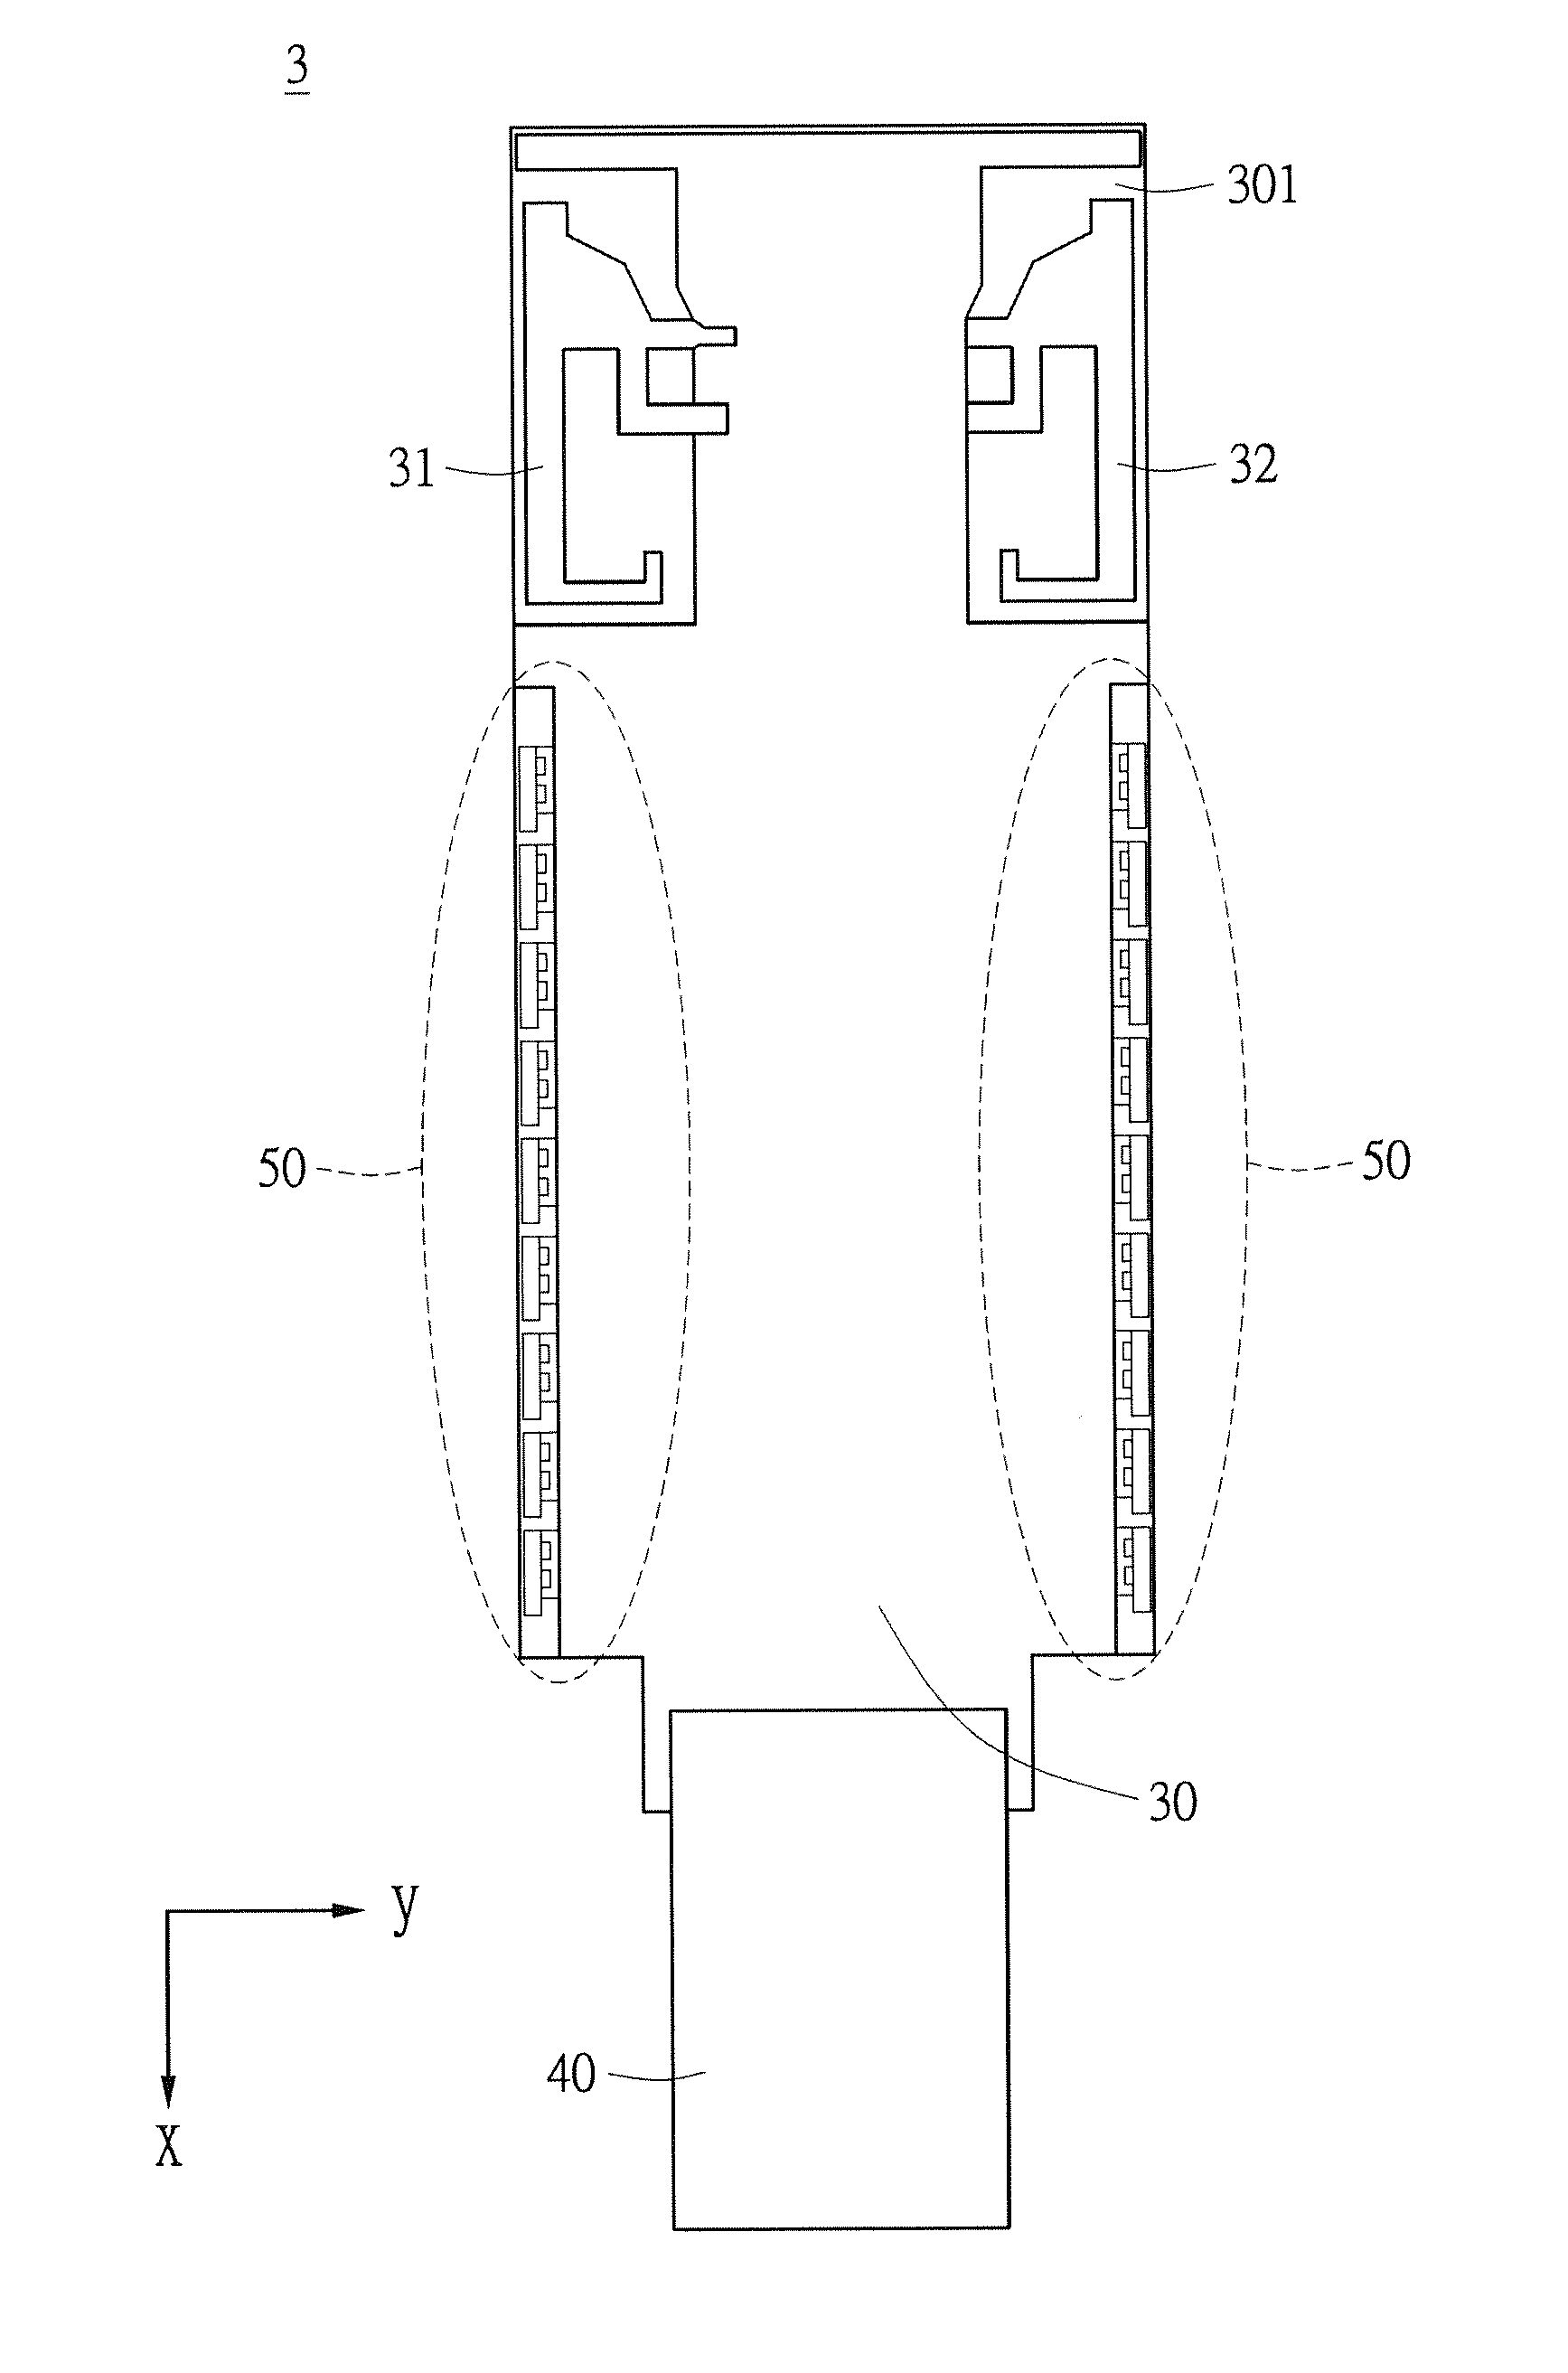 Current breaker and wireless communication device having the same